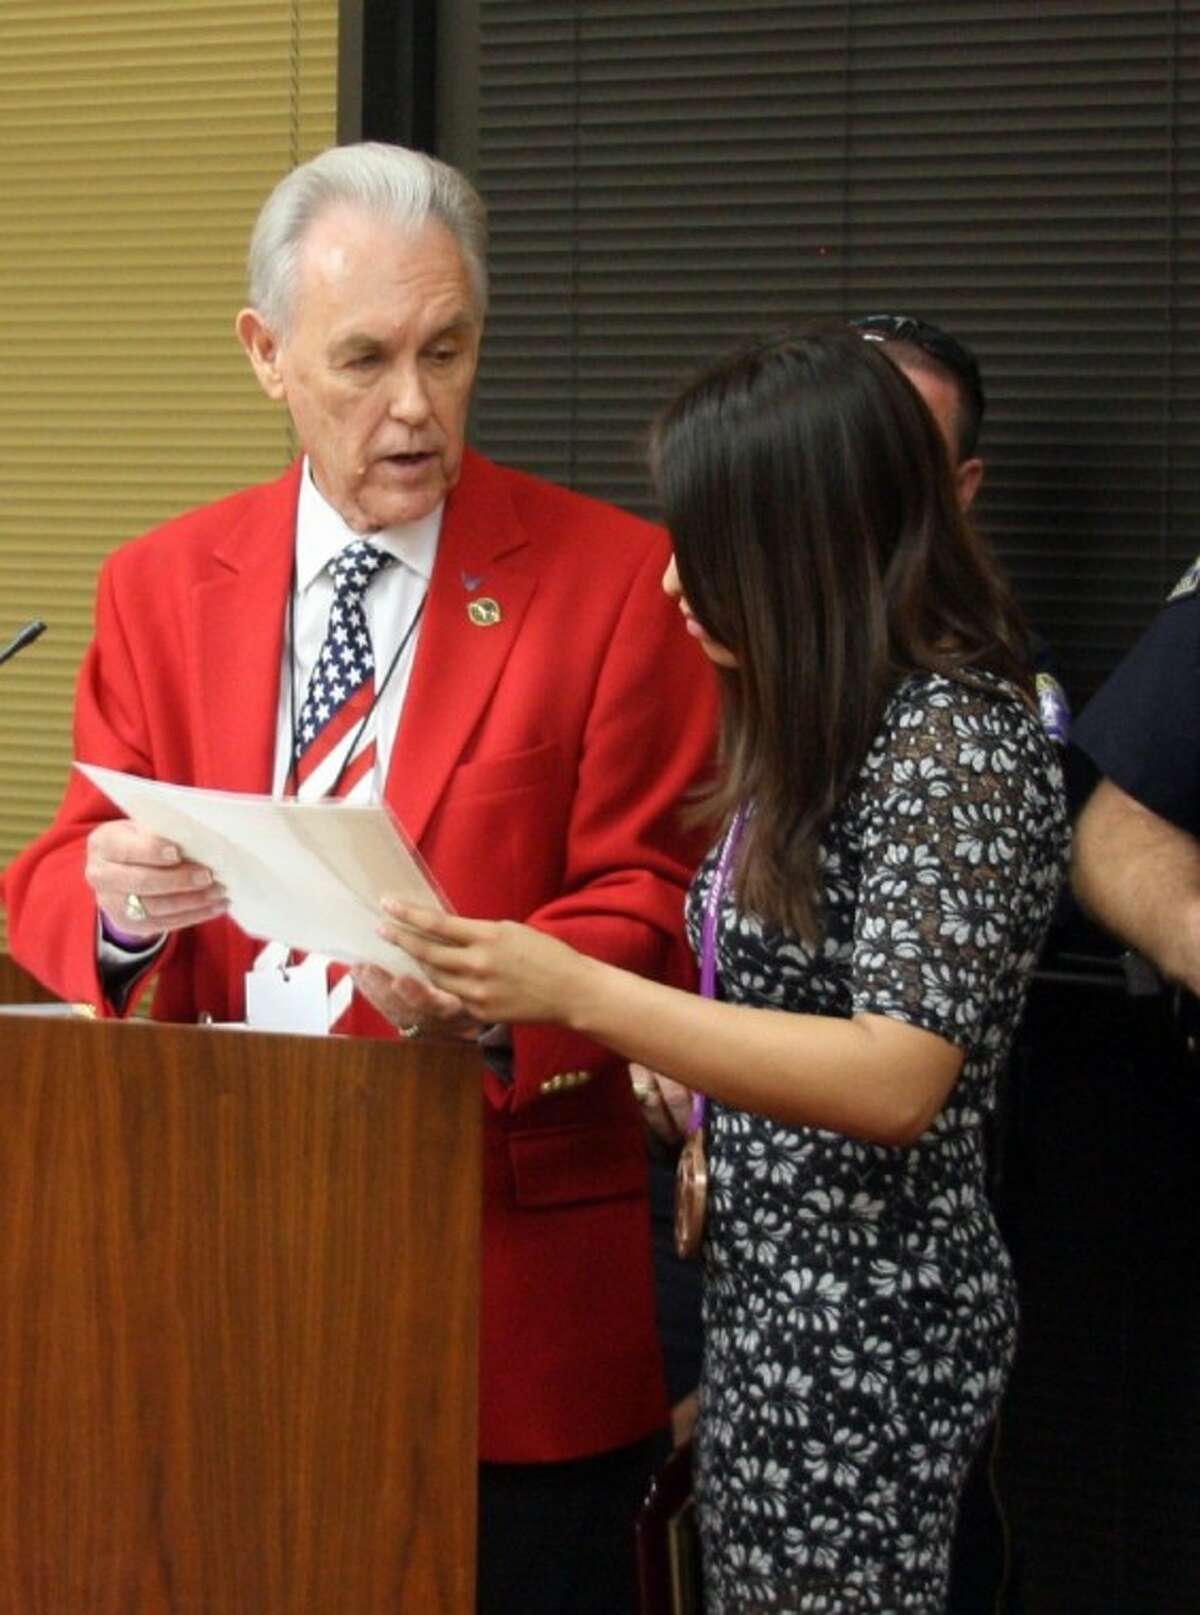 Richard Scott, director of community relations in Pasadena, is shown with Olympic medalist Marlen Esparza during an awards ceremony at a City Council meeting in 2012. On Tuesday, Scott testified in a voting rights lawsuit that he regretted breaking state ethics laws.